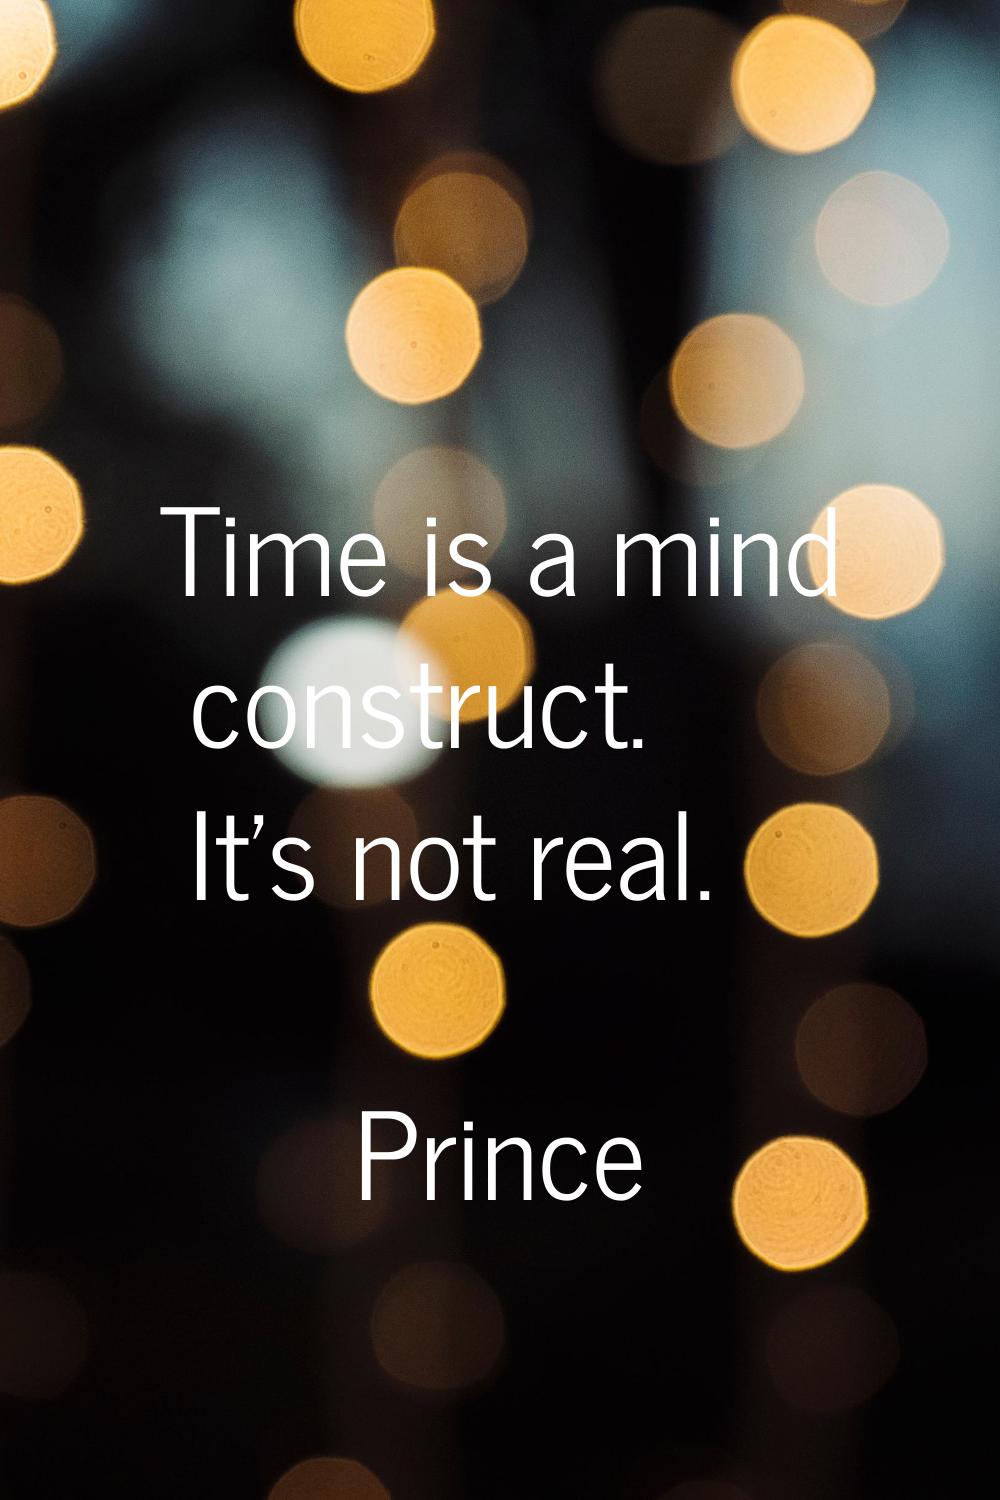 Time is a mind construct. It's not real.